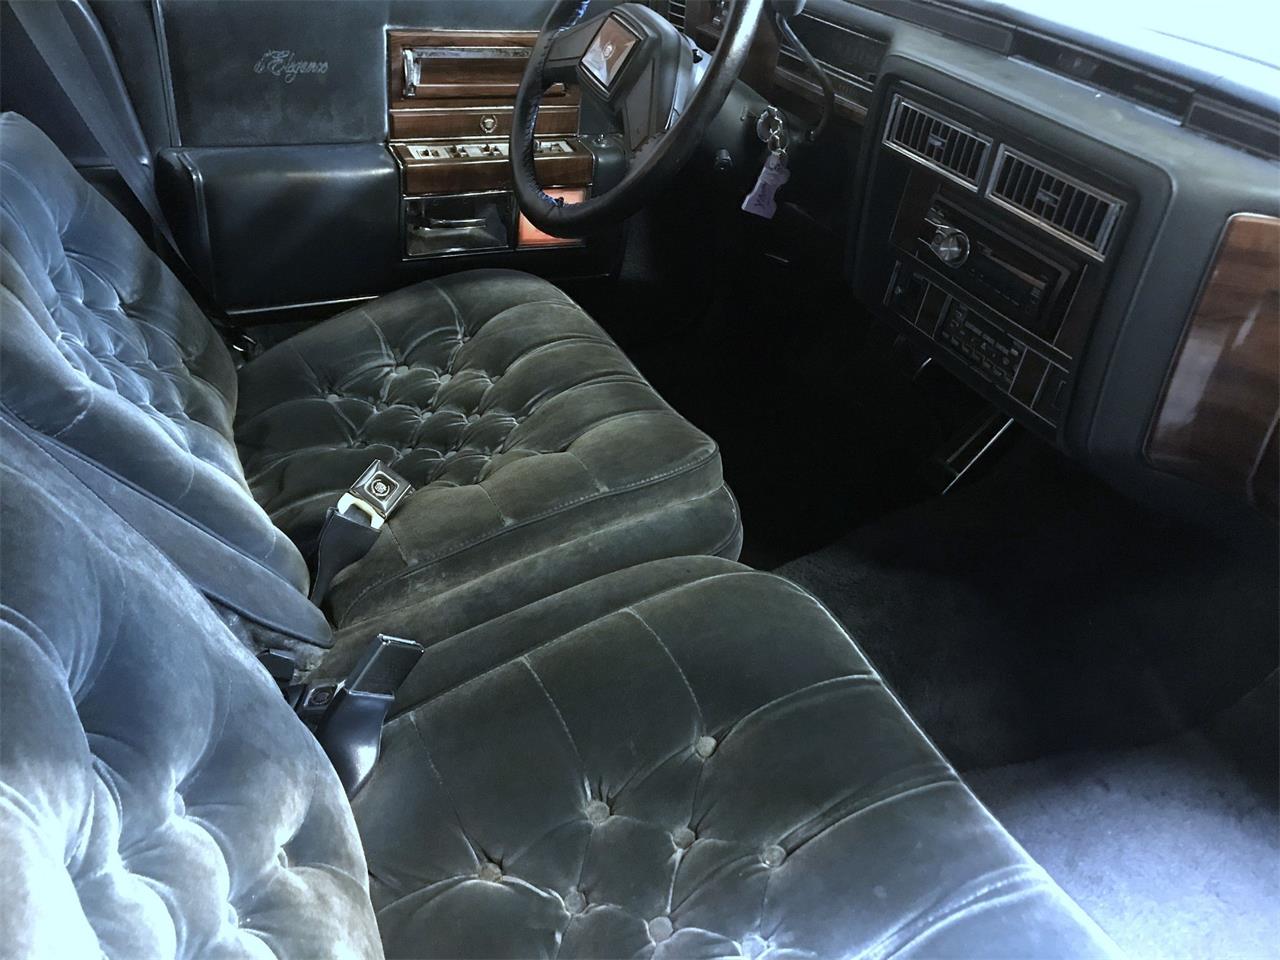 1989 Cadillac Fleetwood Brougham for sale in Stratford, NJ – photo 24